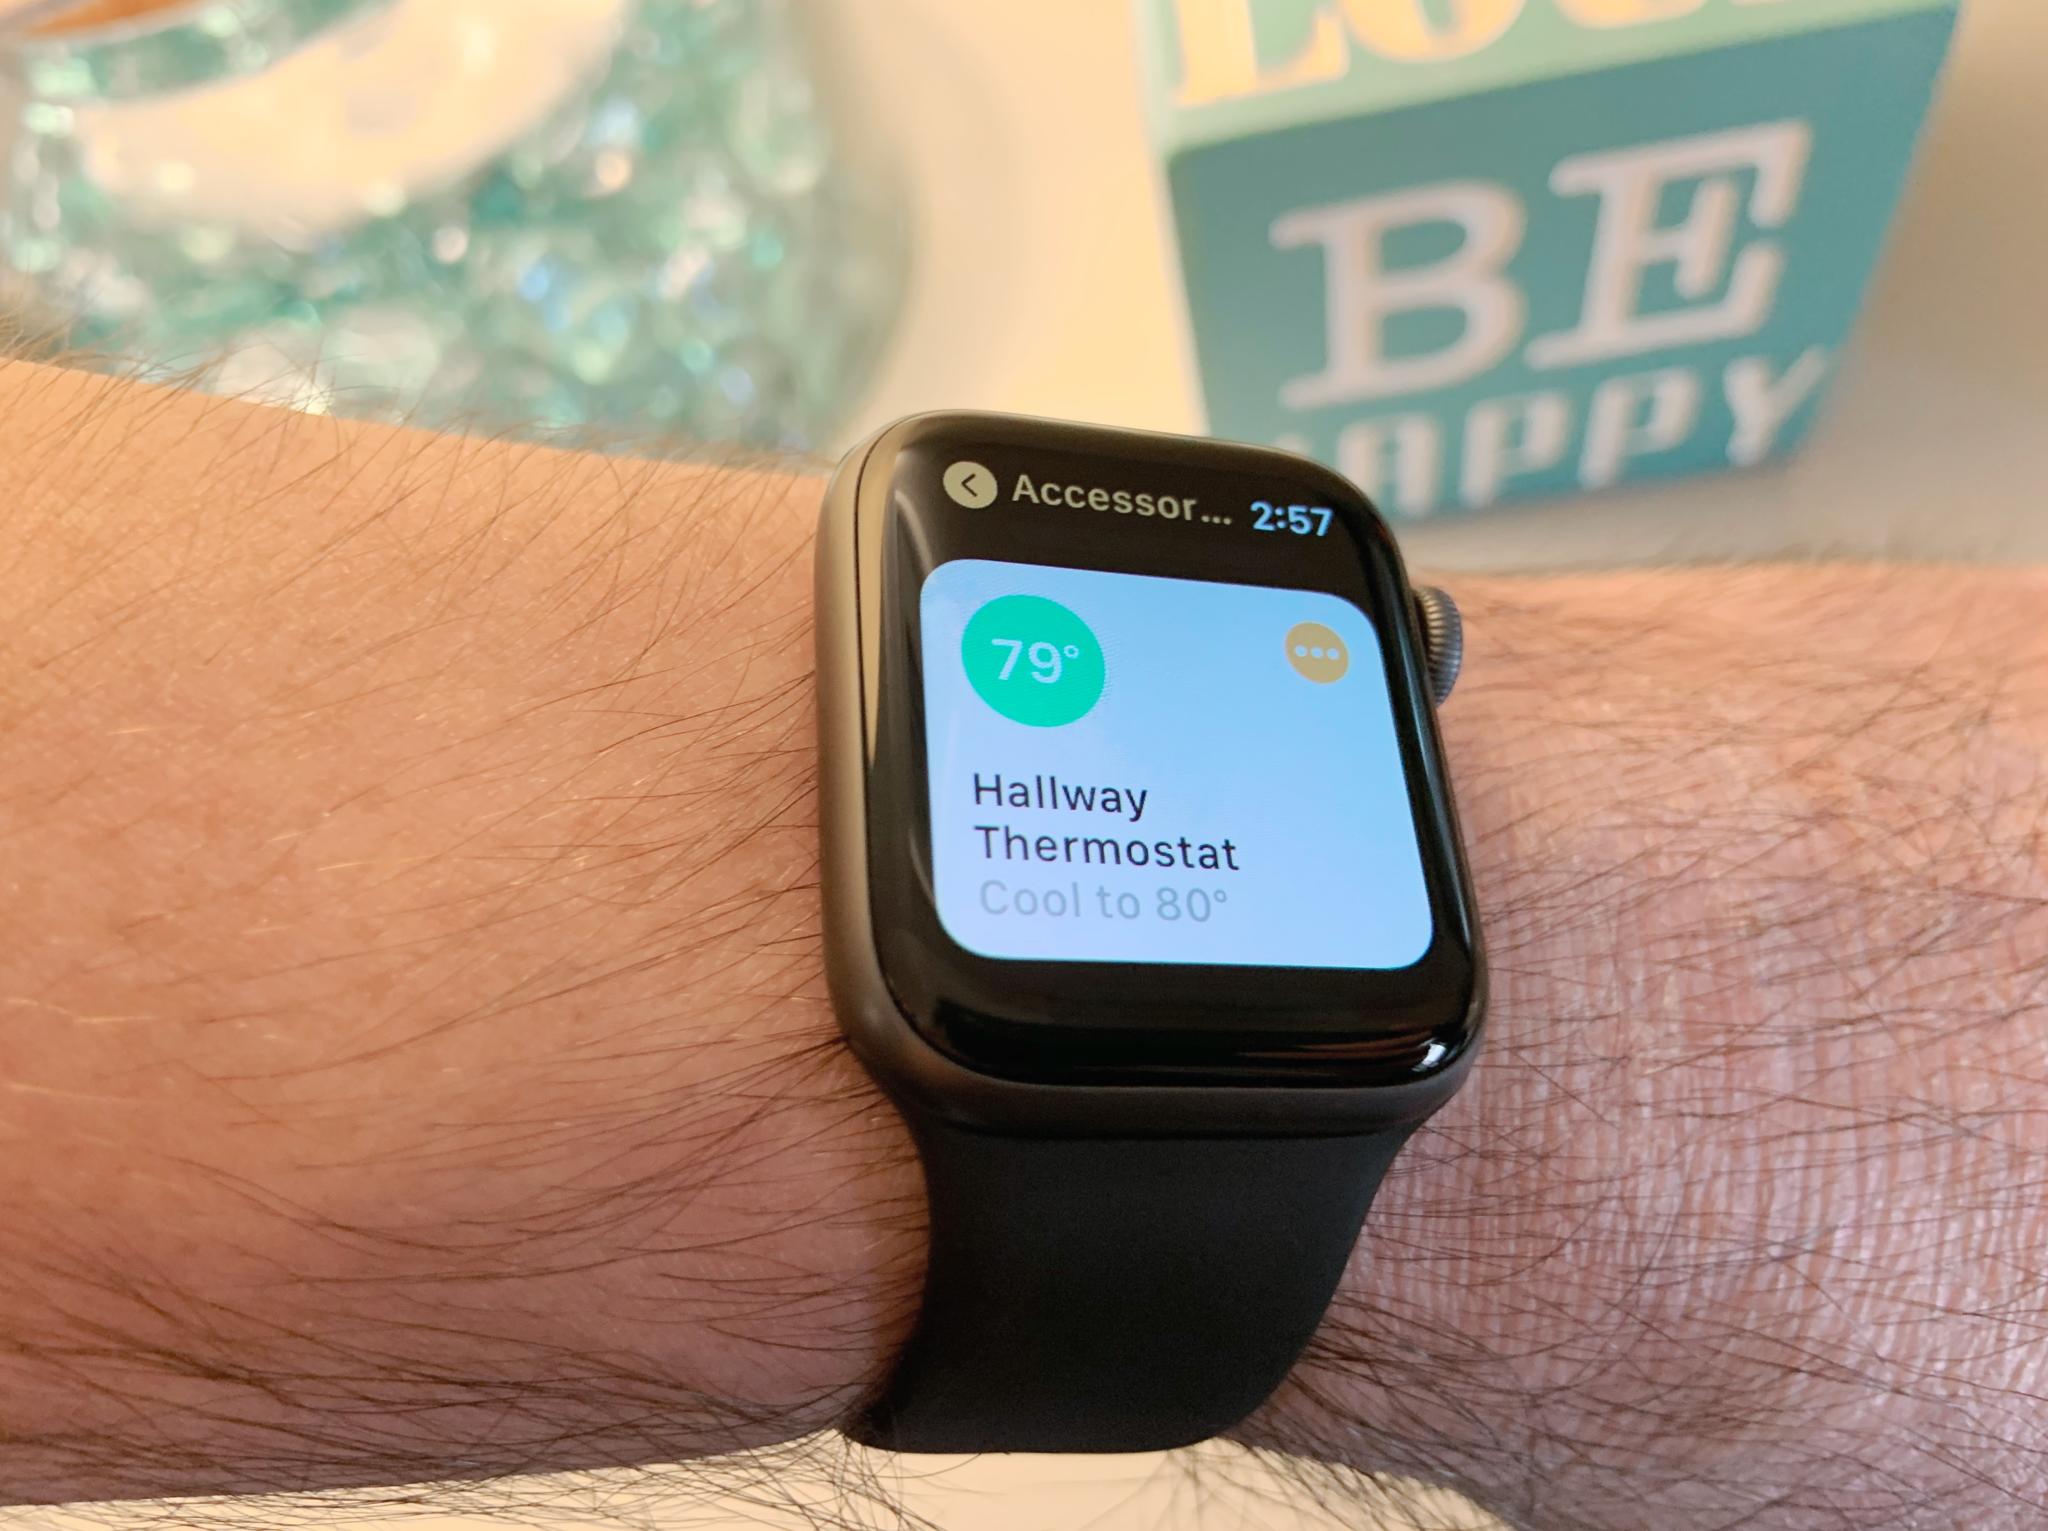 Home app displayed on an Apple Watch Series 4